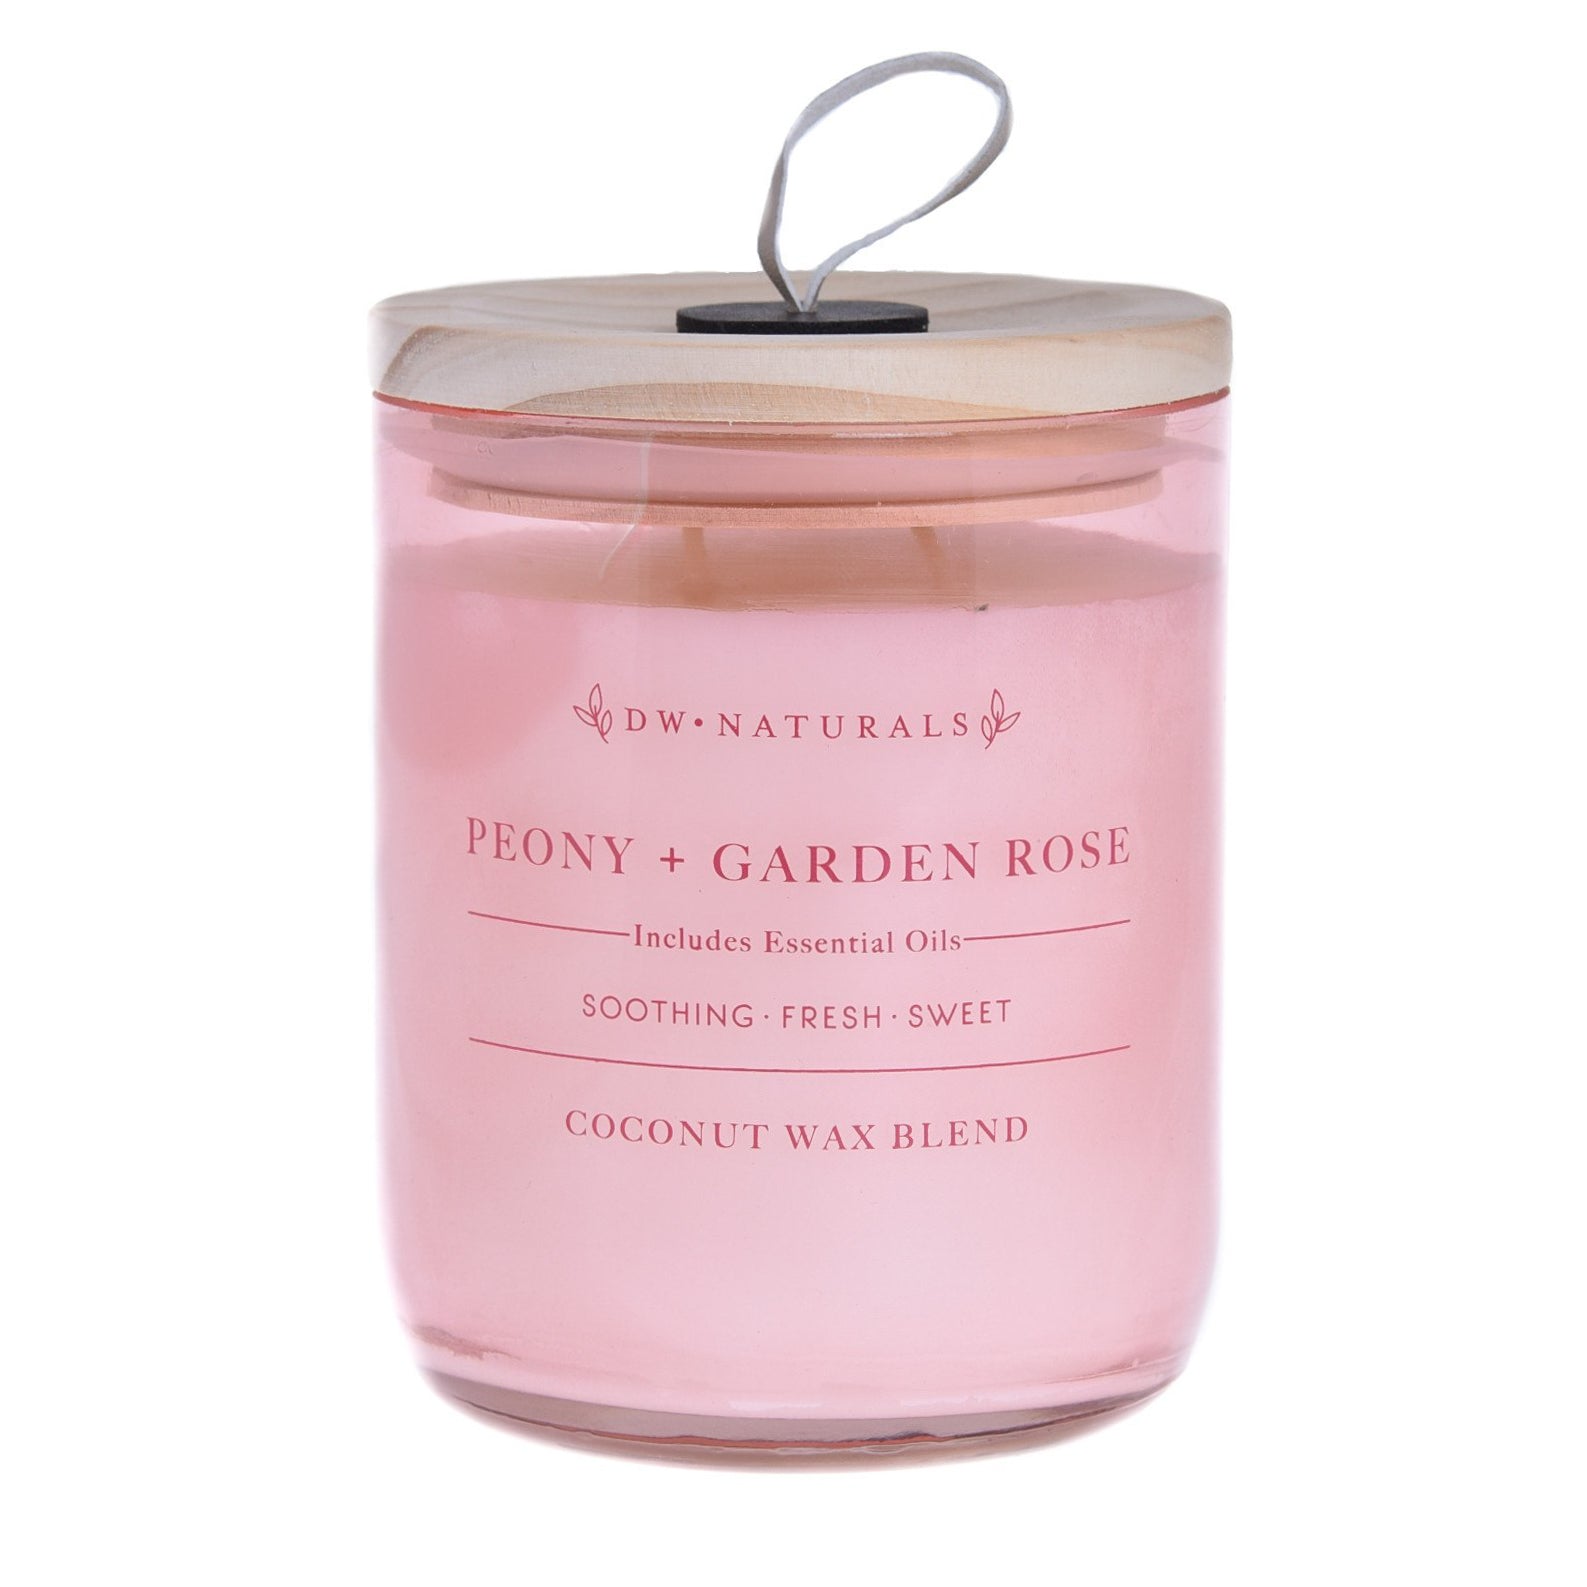  %DW'-NATURALngf PEONY GARDEN ROSE lncludes Bocential Oils SOOTHING - FRESH - SWEET COCoONUT WAX BLEND 